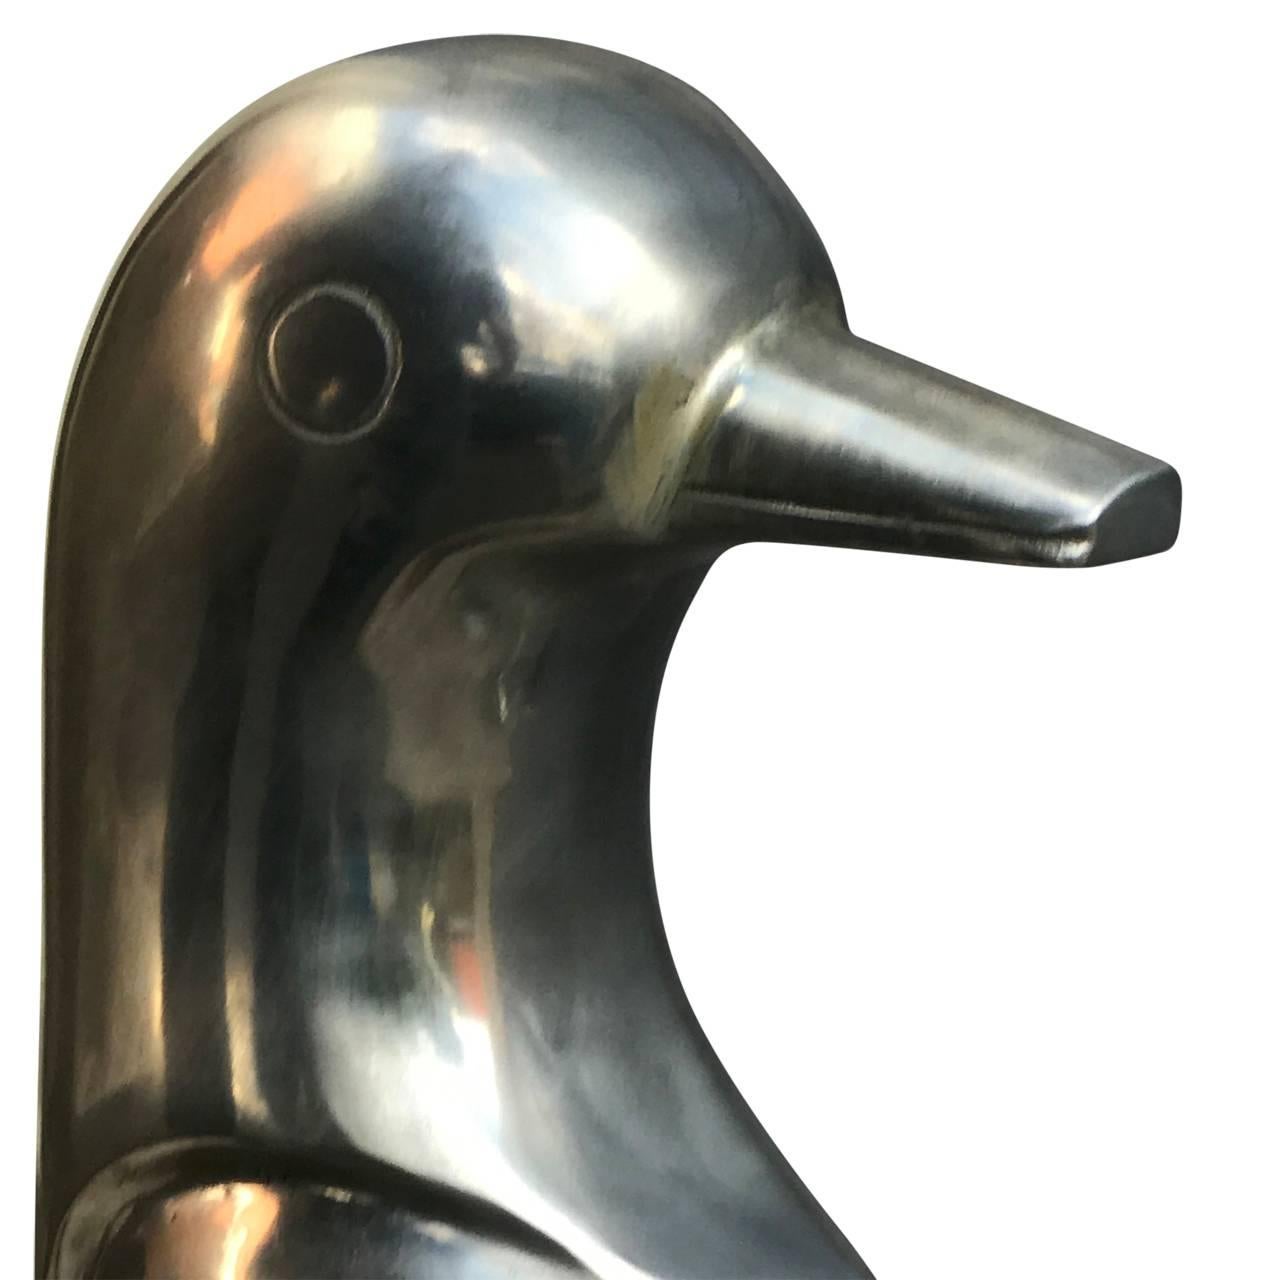 Two aluminum emperor penguins, mother and daughter or father and son, on a black wooden base.